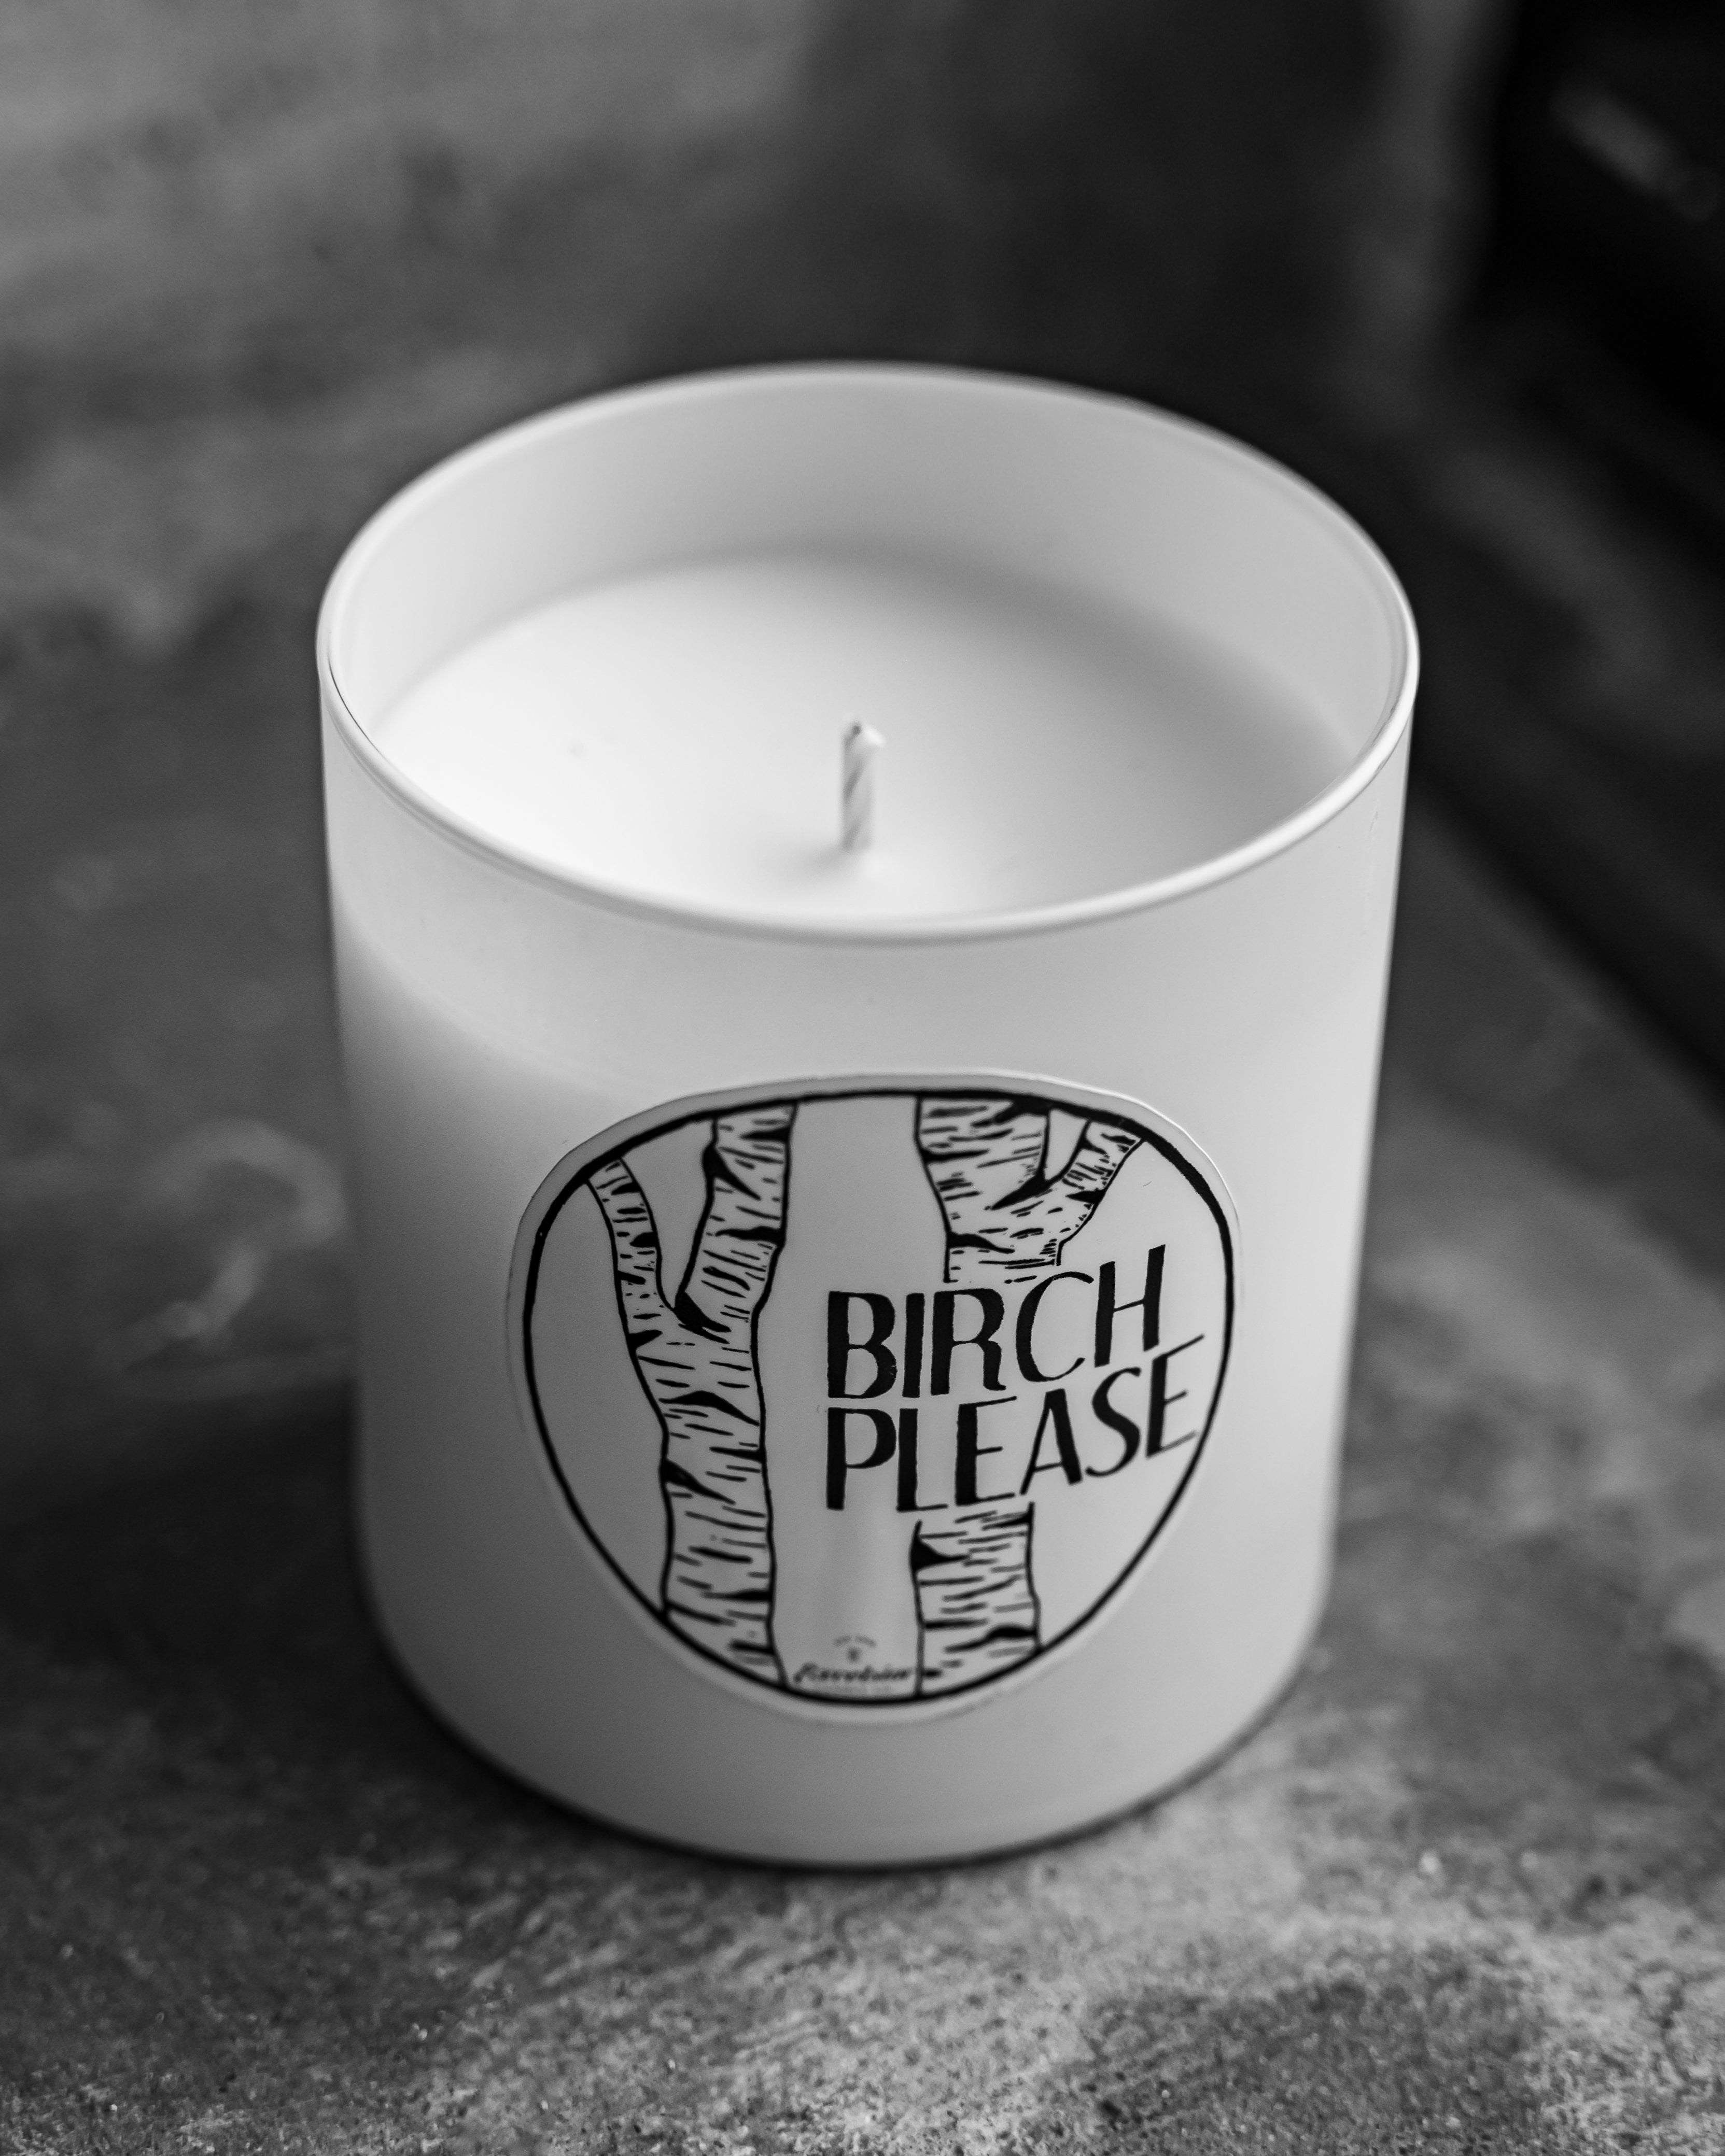 Birch Please. Simply amazing if we may say so ourselves! Top notes of bergamot, orange, and lemon. Middle notes of geranium, lily, and rose. Base notes of patchouli and vetiver. A soy candle you won't second guess.